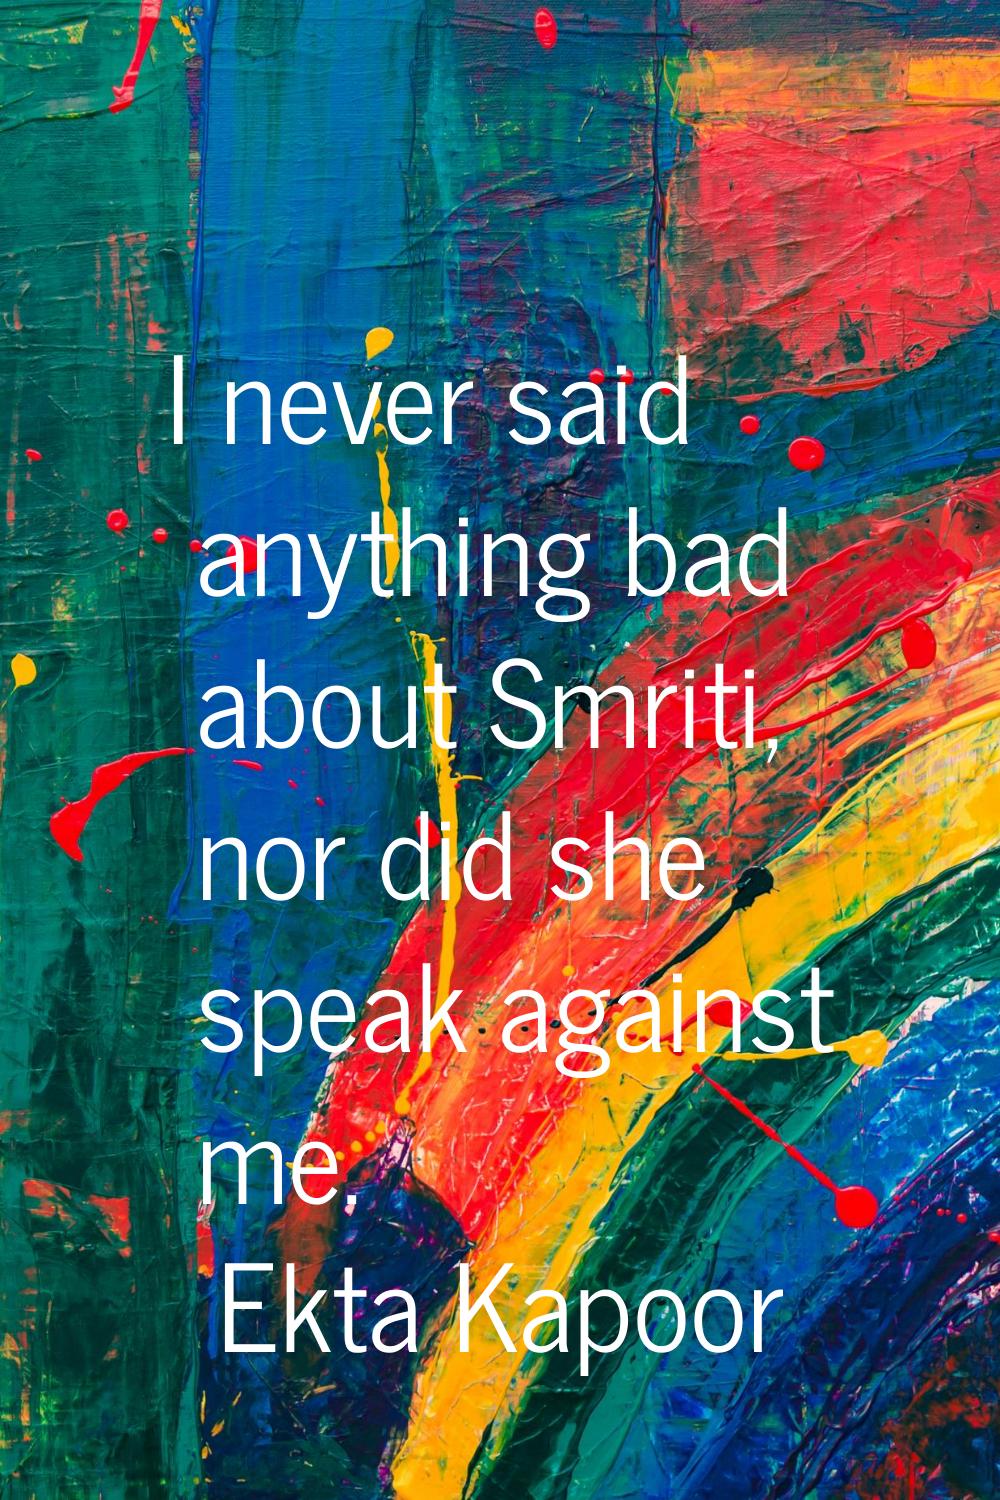 I never said anything bad about Smriti, nor did she speak against me.